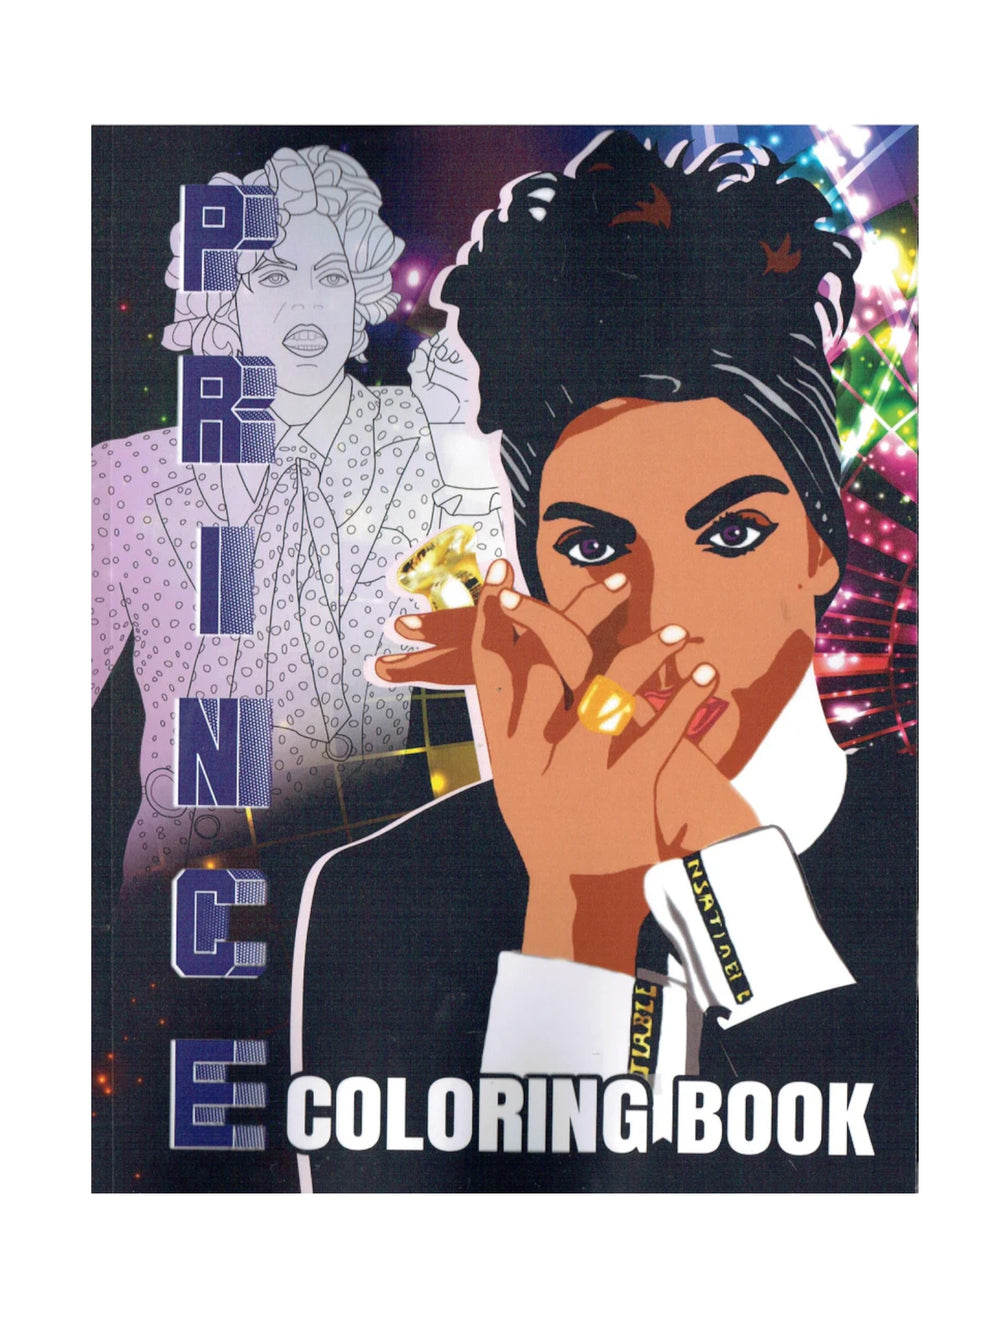 Prince – Colouring Book #3 Softback Brand New 32 Images